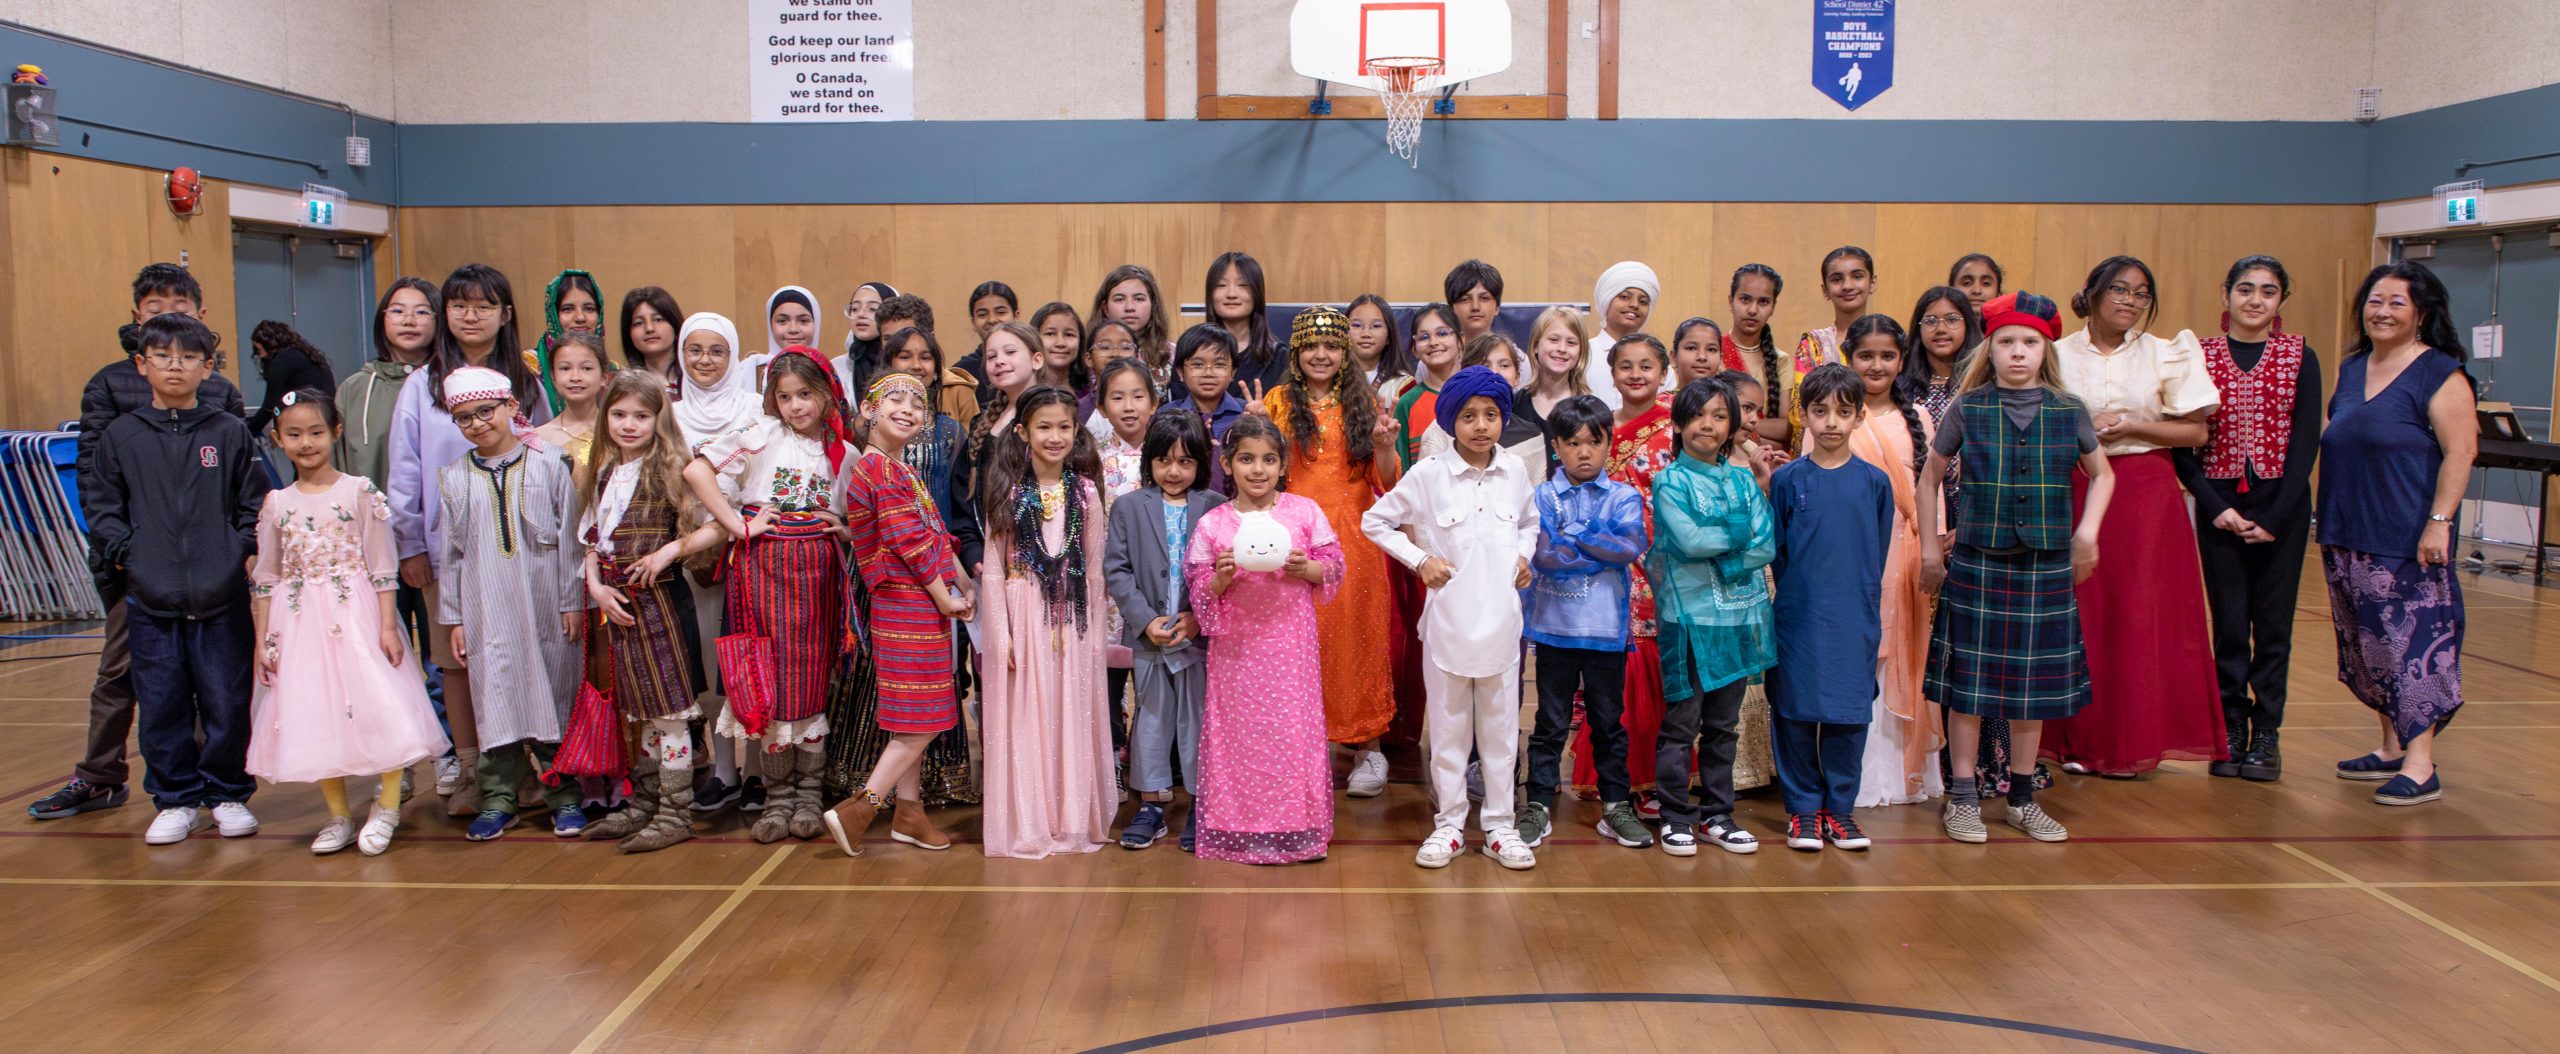 Students who took part in Highland Park Elementary's World Culture Day assembly pose for a group photo in the gymnasium.